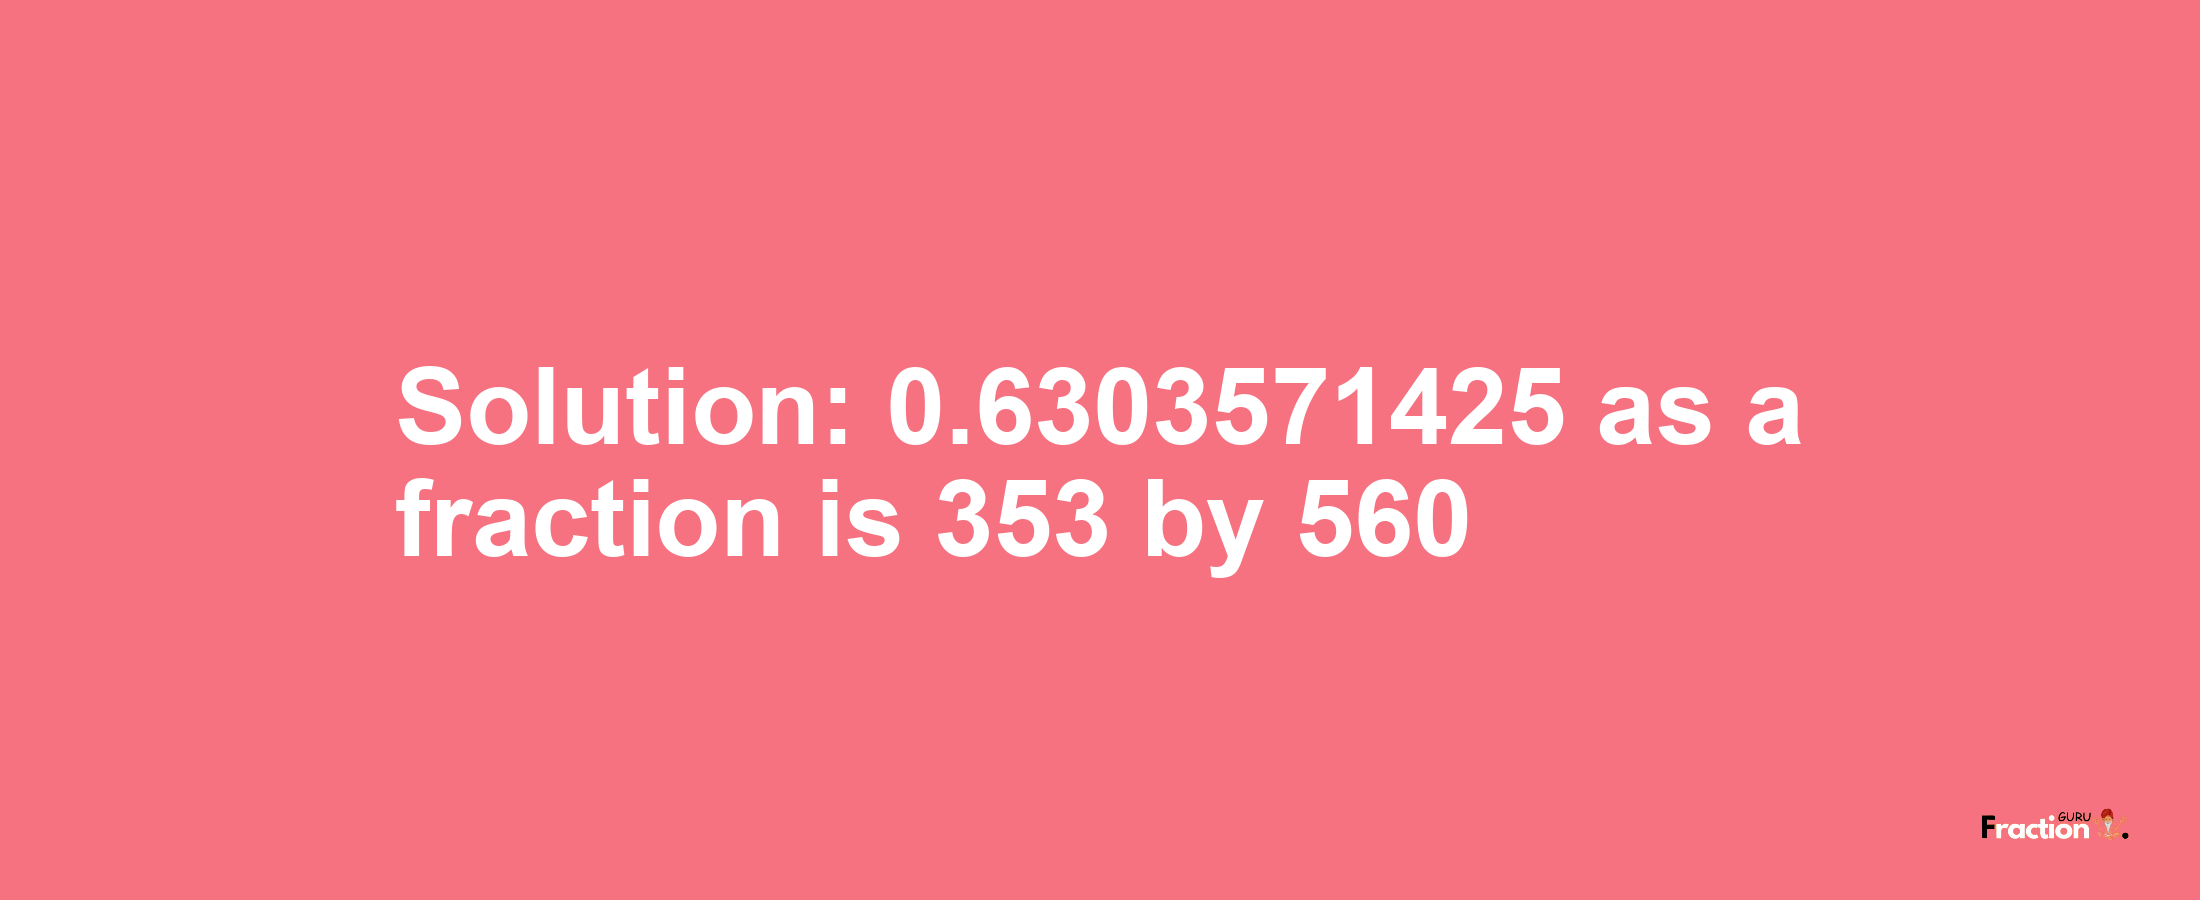 Solution:0.6303571425 as a fraction is 353/560